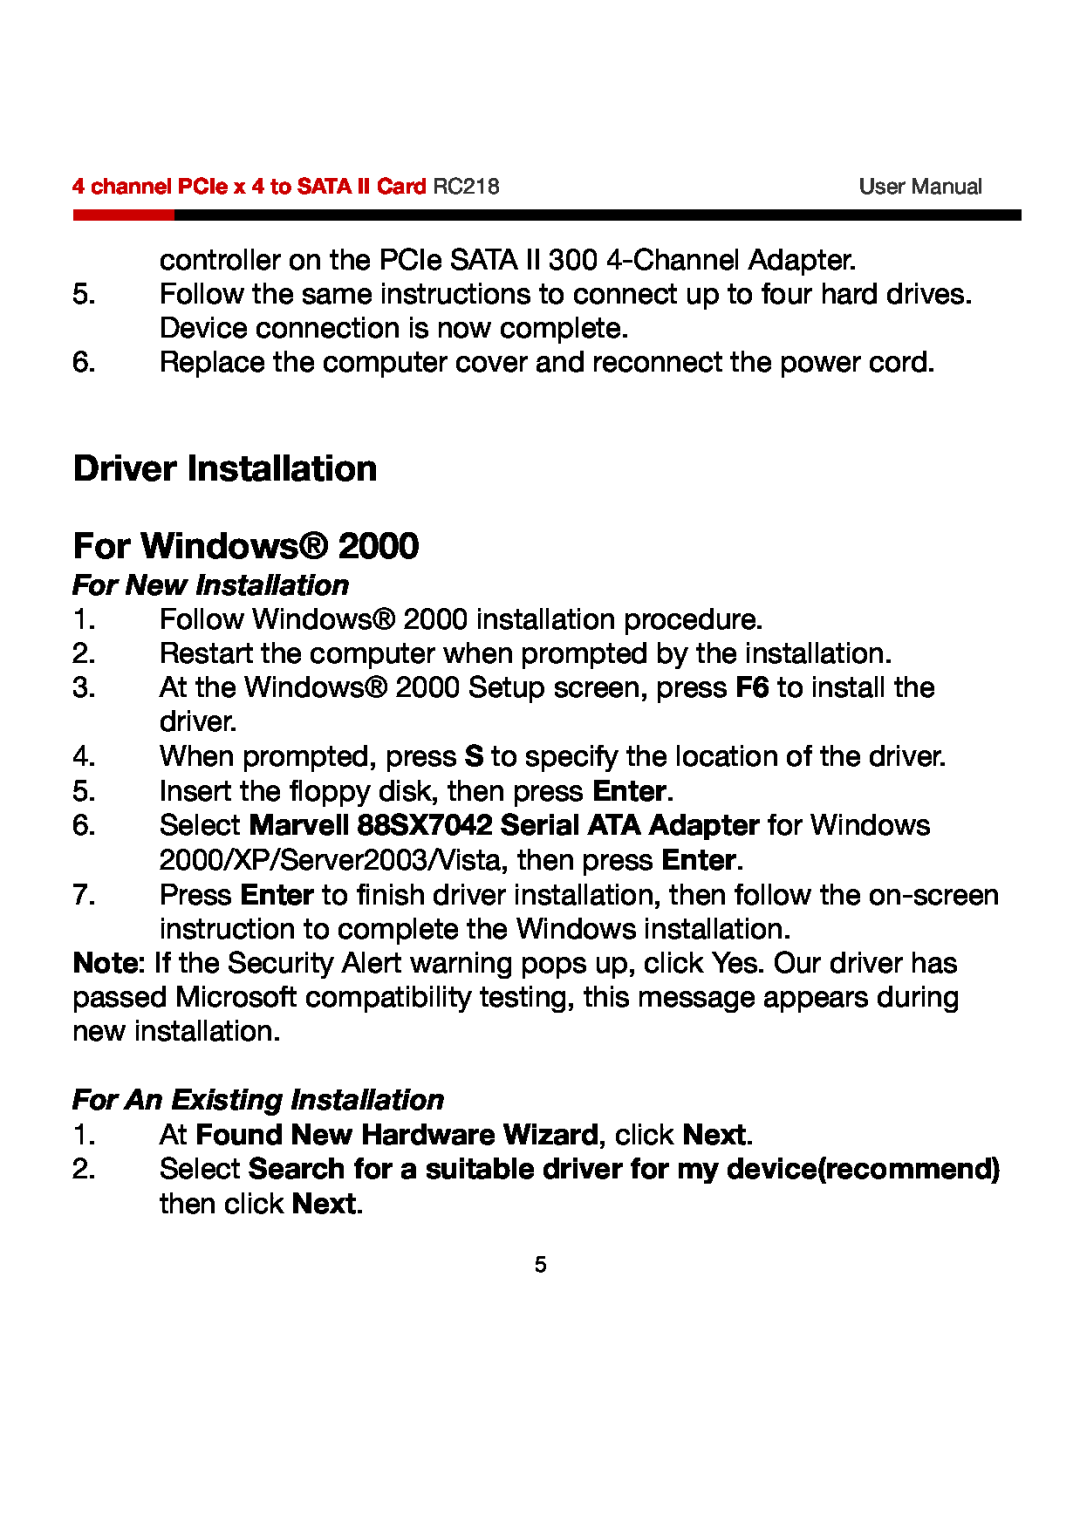 Rosewill RC218 user manual Driver Installation For Windows, For New Installation, For An Existing Installation 